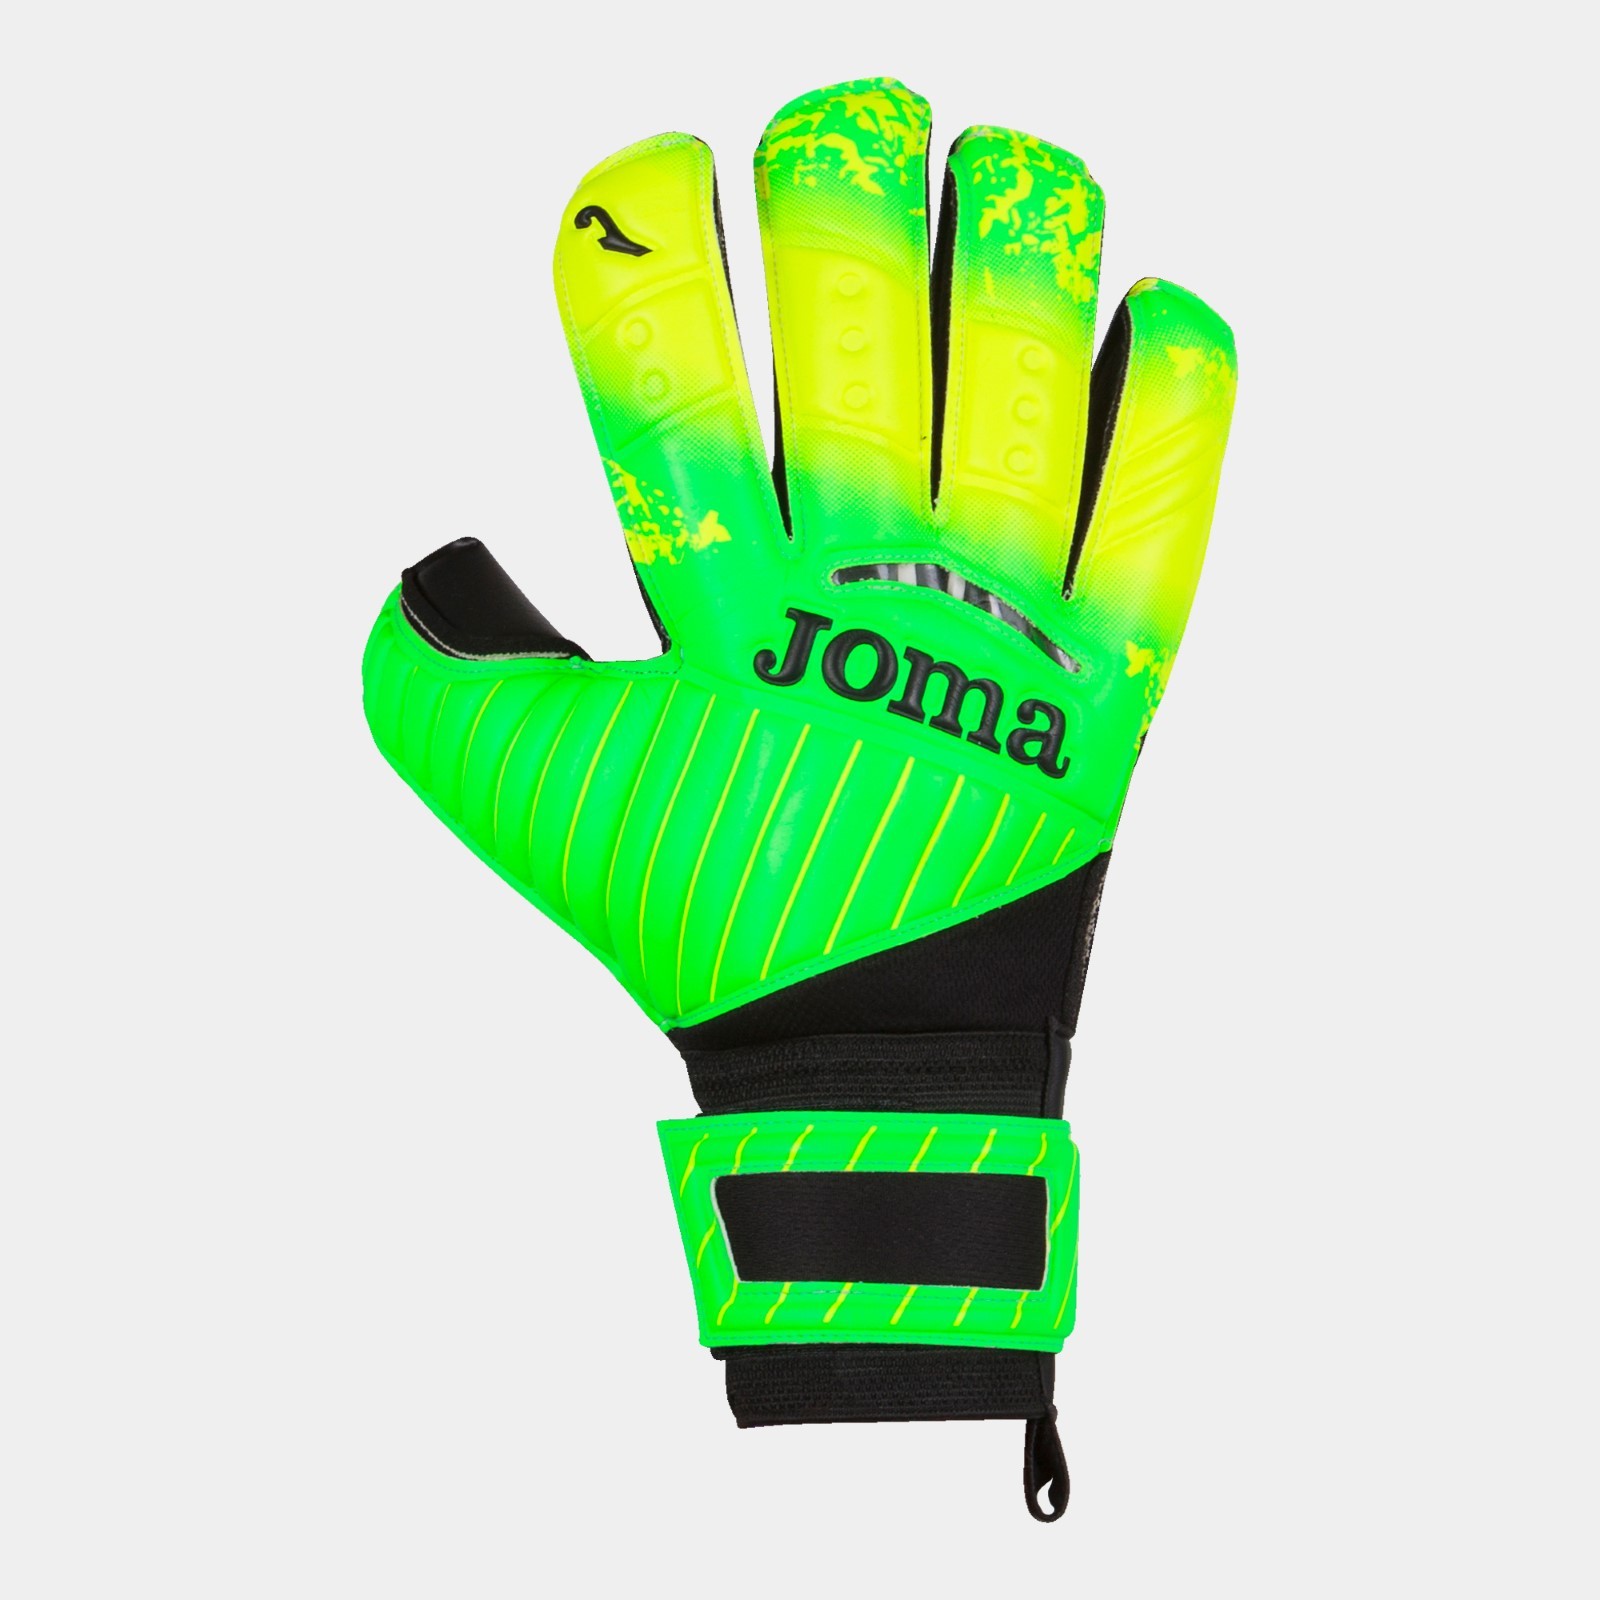 pad insult From Manusi portar Brave, Verde Fluorescent, JOMA